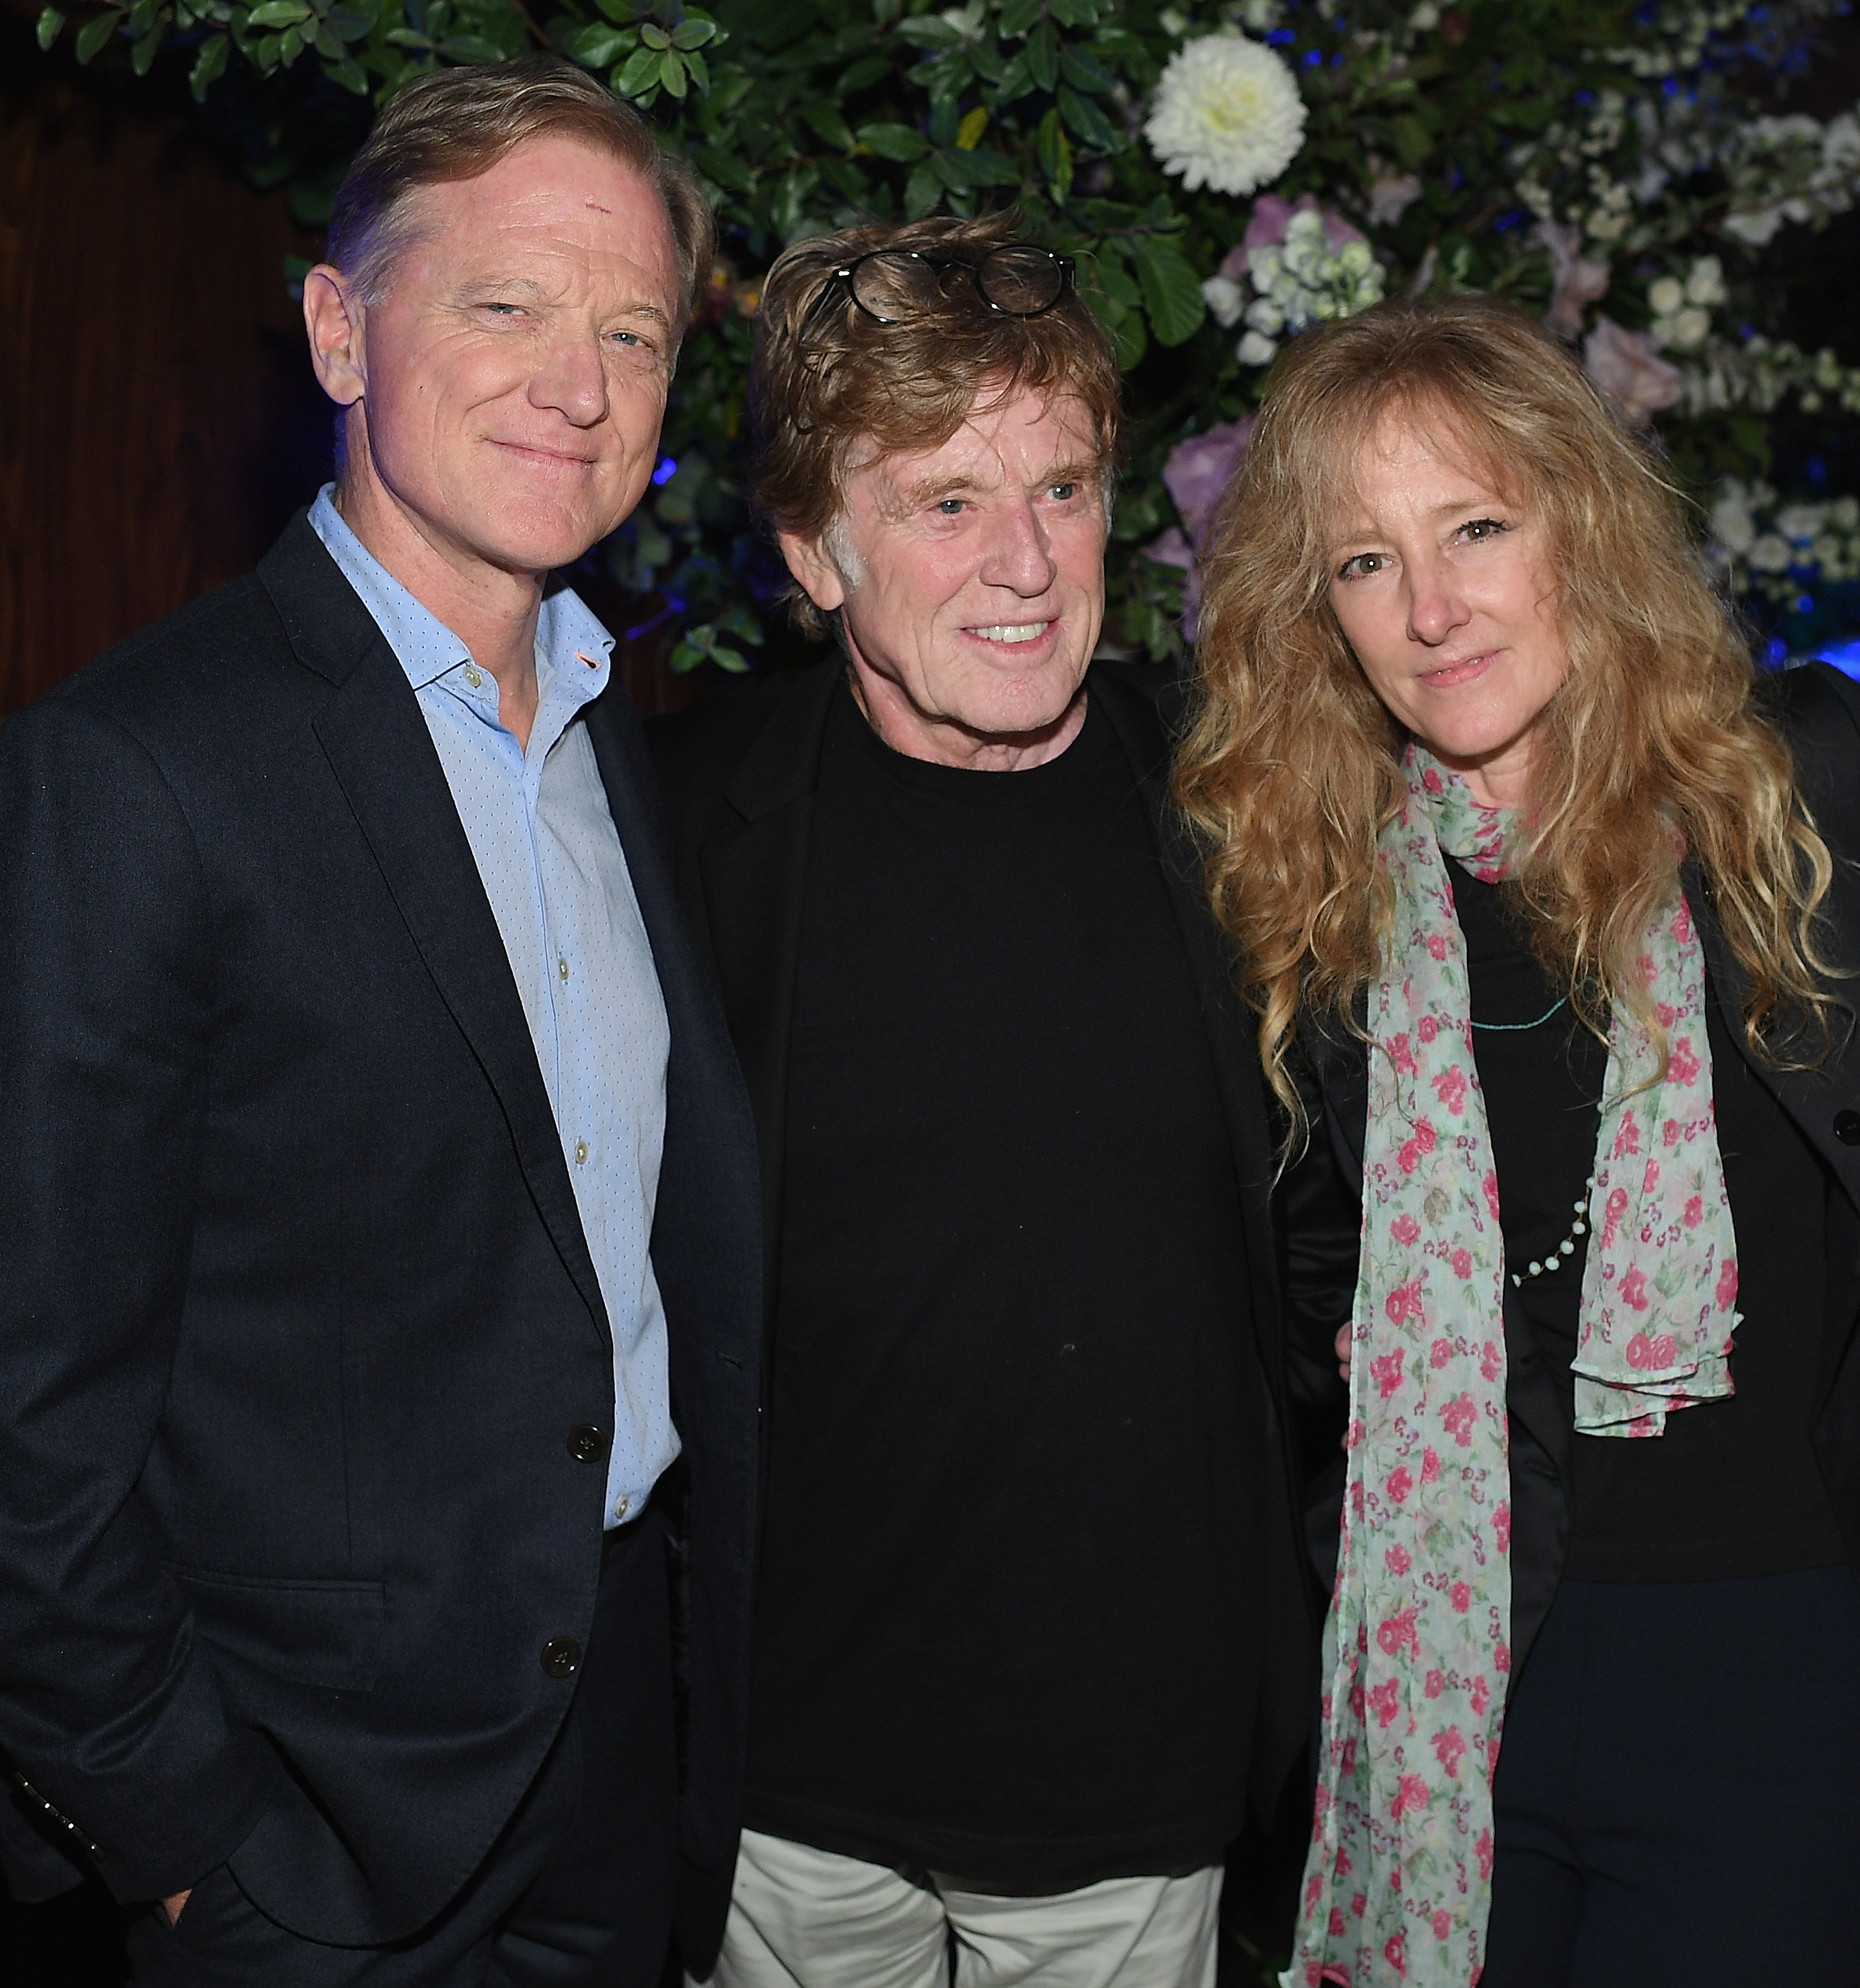 James Redford, Robert Redford, and Shauna Redford on September 27, 2017, in New York City | Source: Getty Images